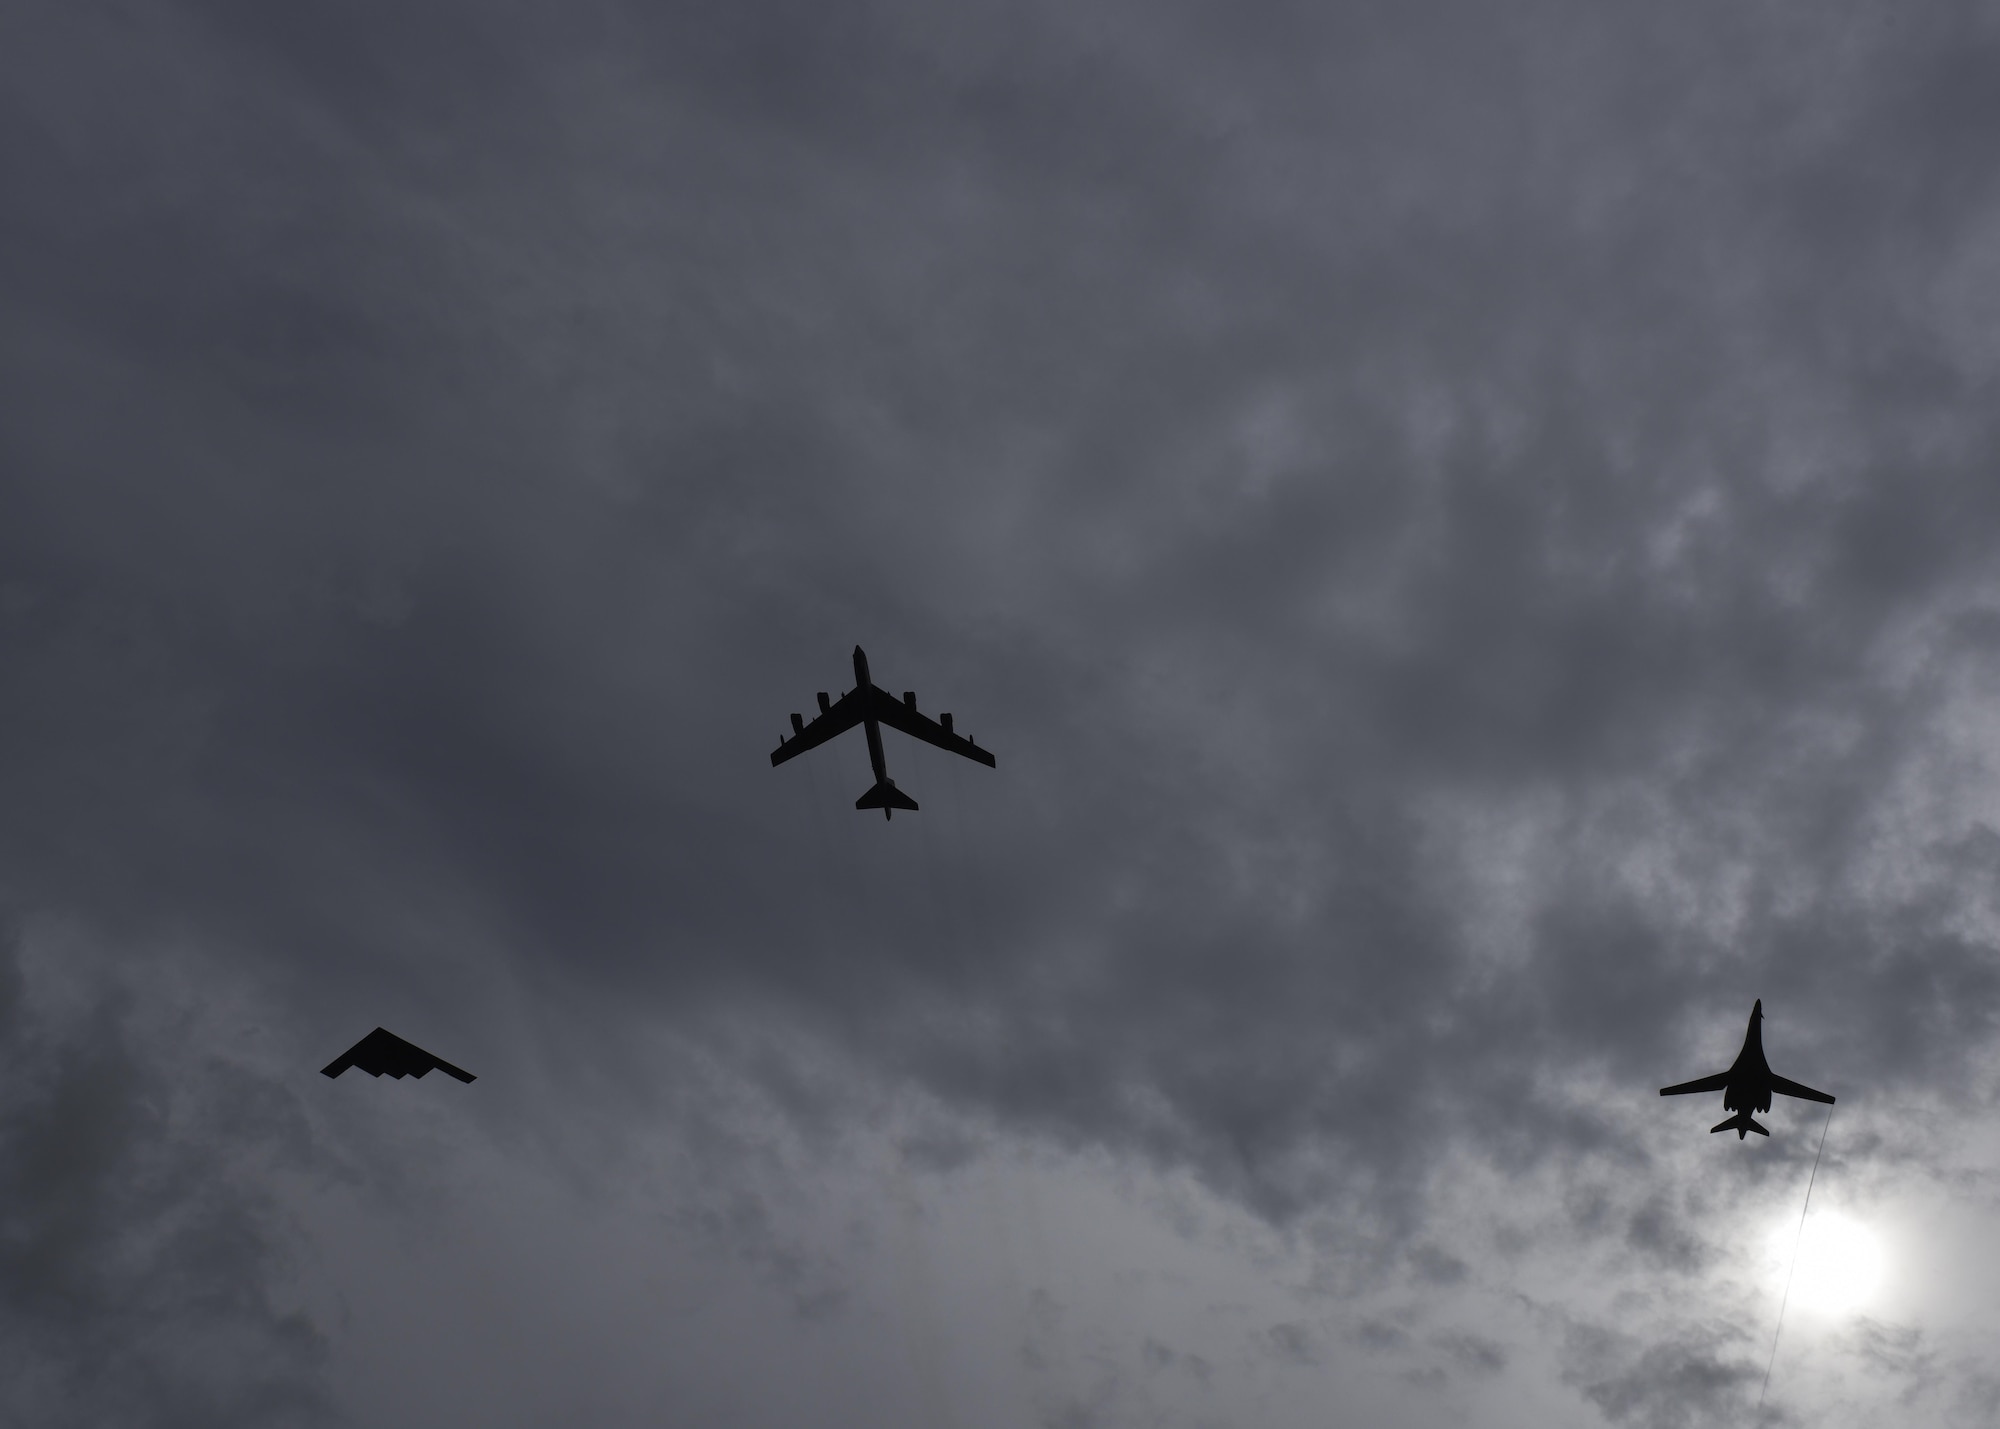 A B-52 Stratofortress, B-1 Lancer and B-2 Spirit conduct a flyover at Andersen Air Force Base, Guam, Aug.17, 2016. This marks the first time in history that all three of Air Force Global Strike Command's strategic bomber aircraft are simultaneously conducting operations in the U.S. Pacific Command area of operations. The B-1 Lancer, which arrived at Andersen Aug. 6, will replace the B-52 in support of the U.S. Pacific Command Continuous Bomber Presence mission. The CBP bomber swap between the B-1 and B-52 is occurring throughout the month of August as the B-1s return to support this mission for the first time since April 2006. (U.S. Air Force photo by Tech Sgt Richard P. Ebensberger/Released)